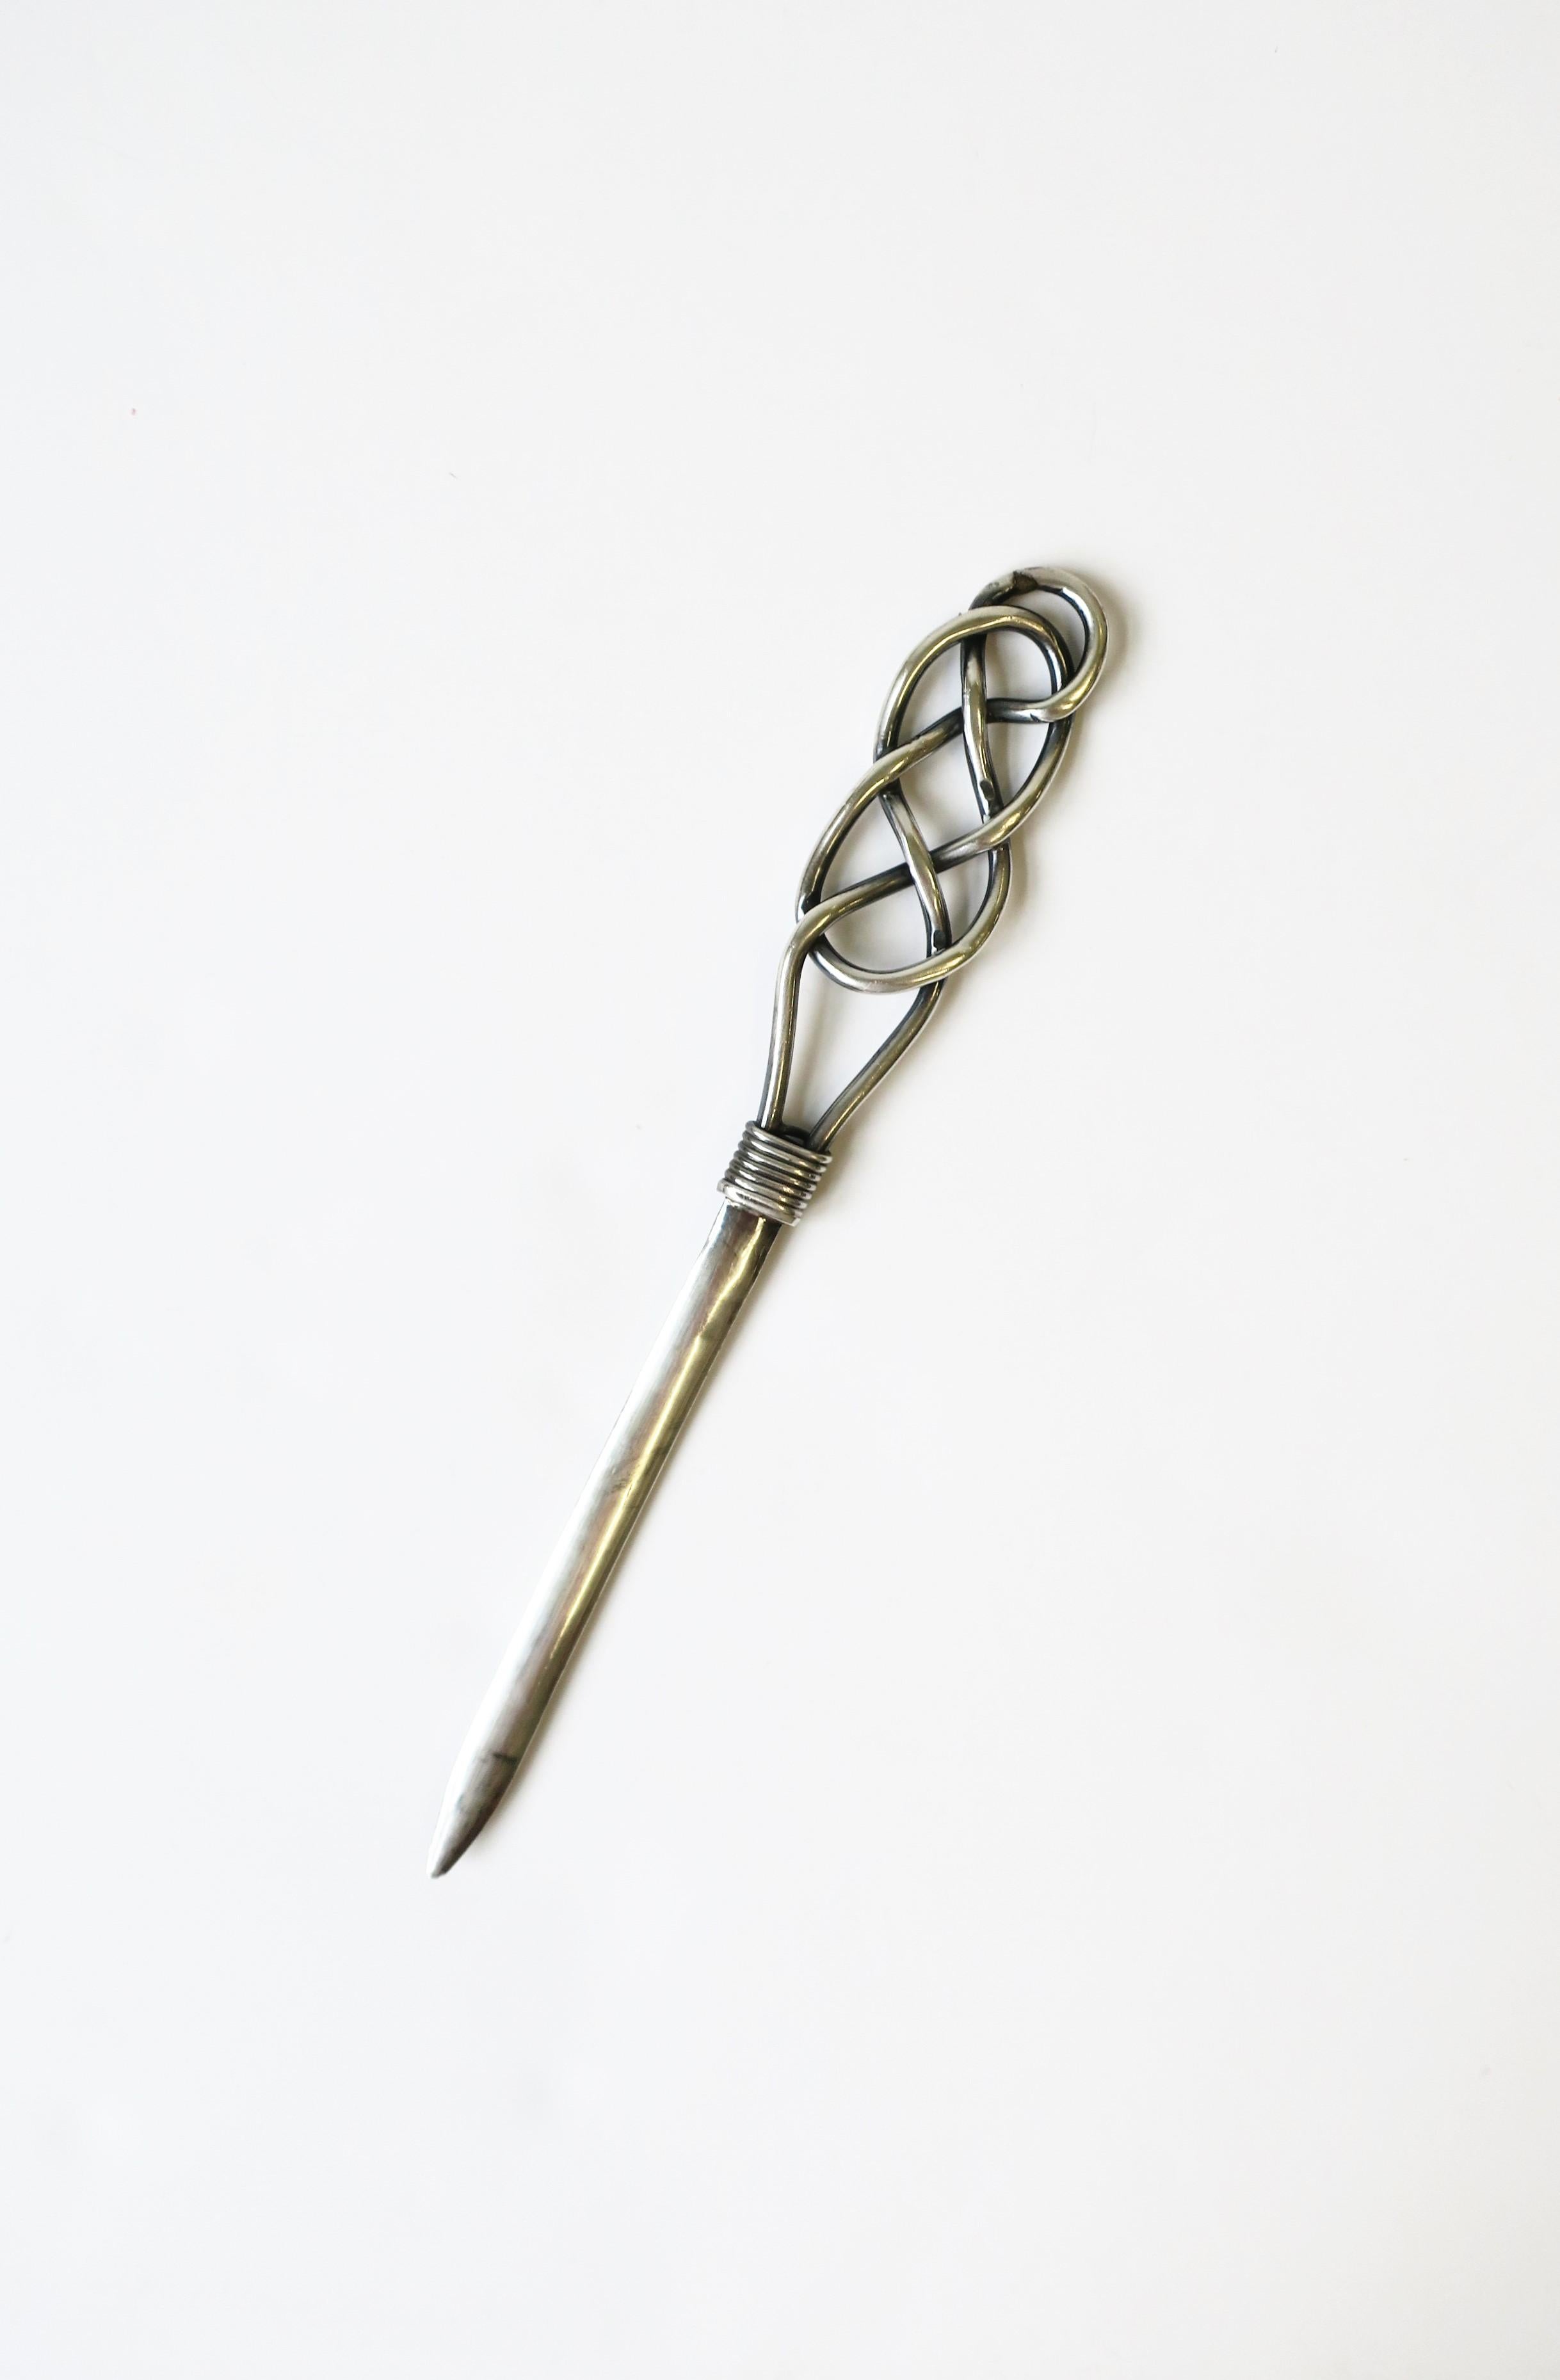 A beautiful sterling silver letter opener with braided handle, in the style of Hermes, circa mid-20th century, Mexico. This Mexican sterling silver letter opener with marking's: 